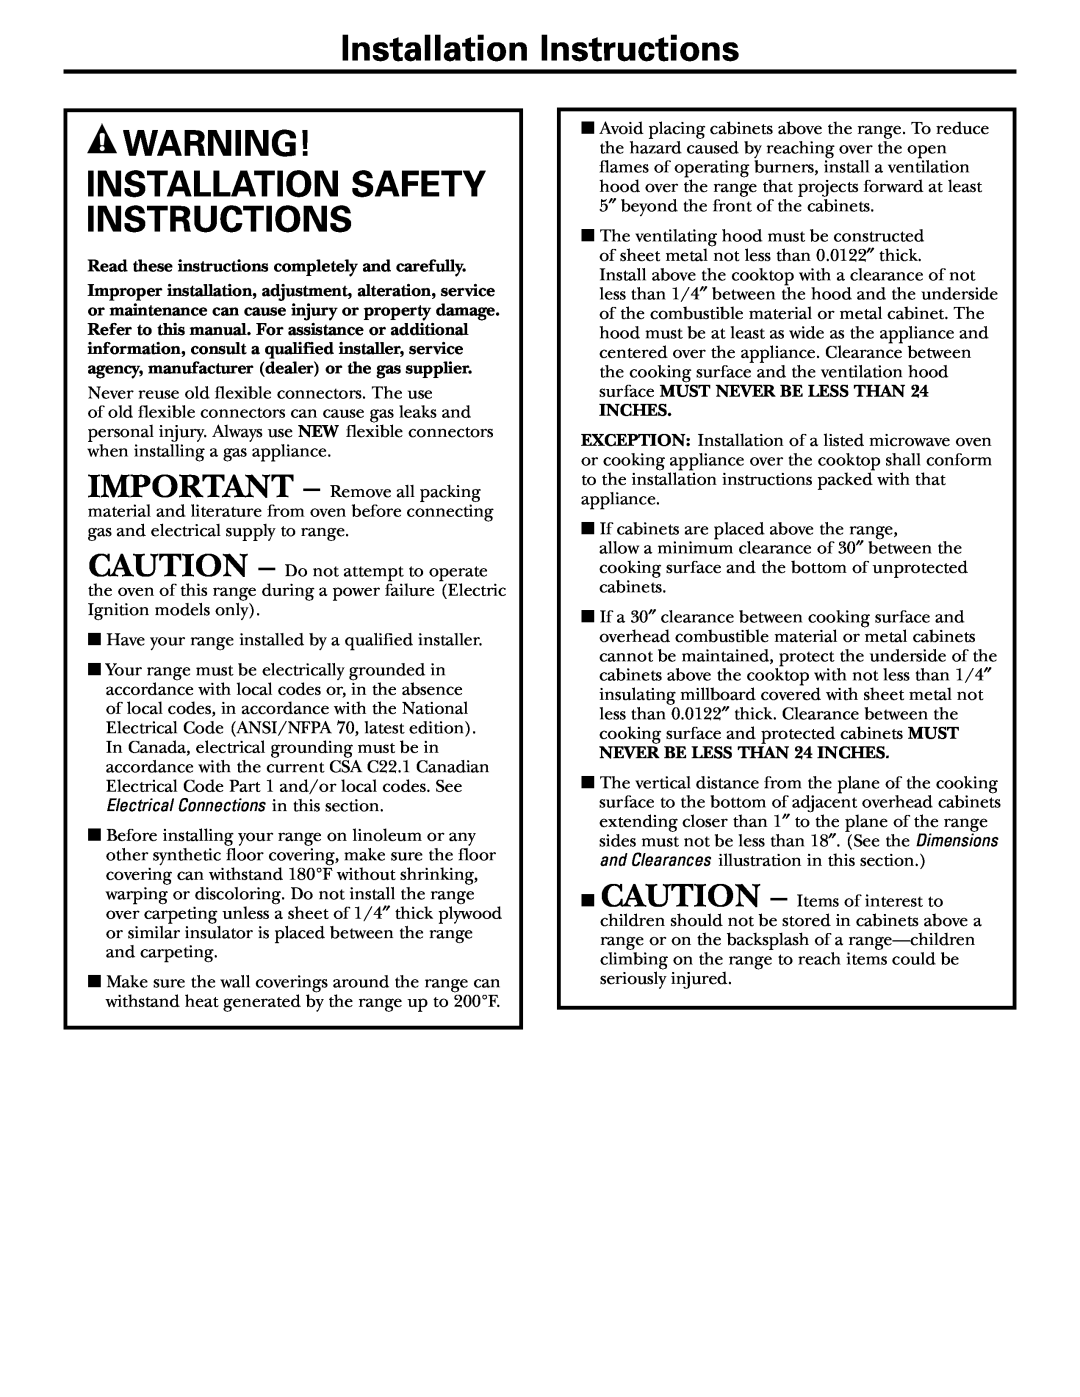 GE JGB918, JGBP88 manual Installation Instructions, Installation Safety Instructions, Electrical Connections in this section 